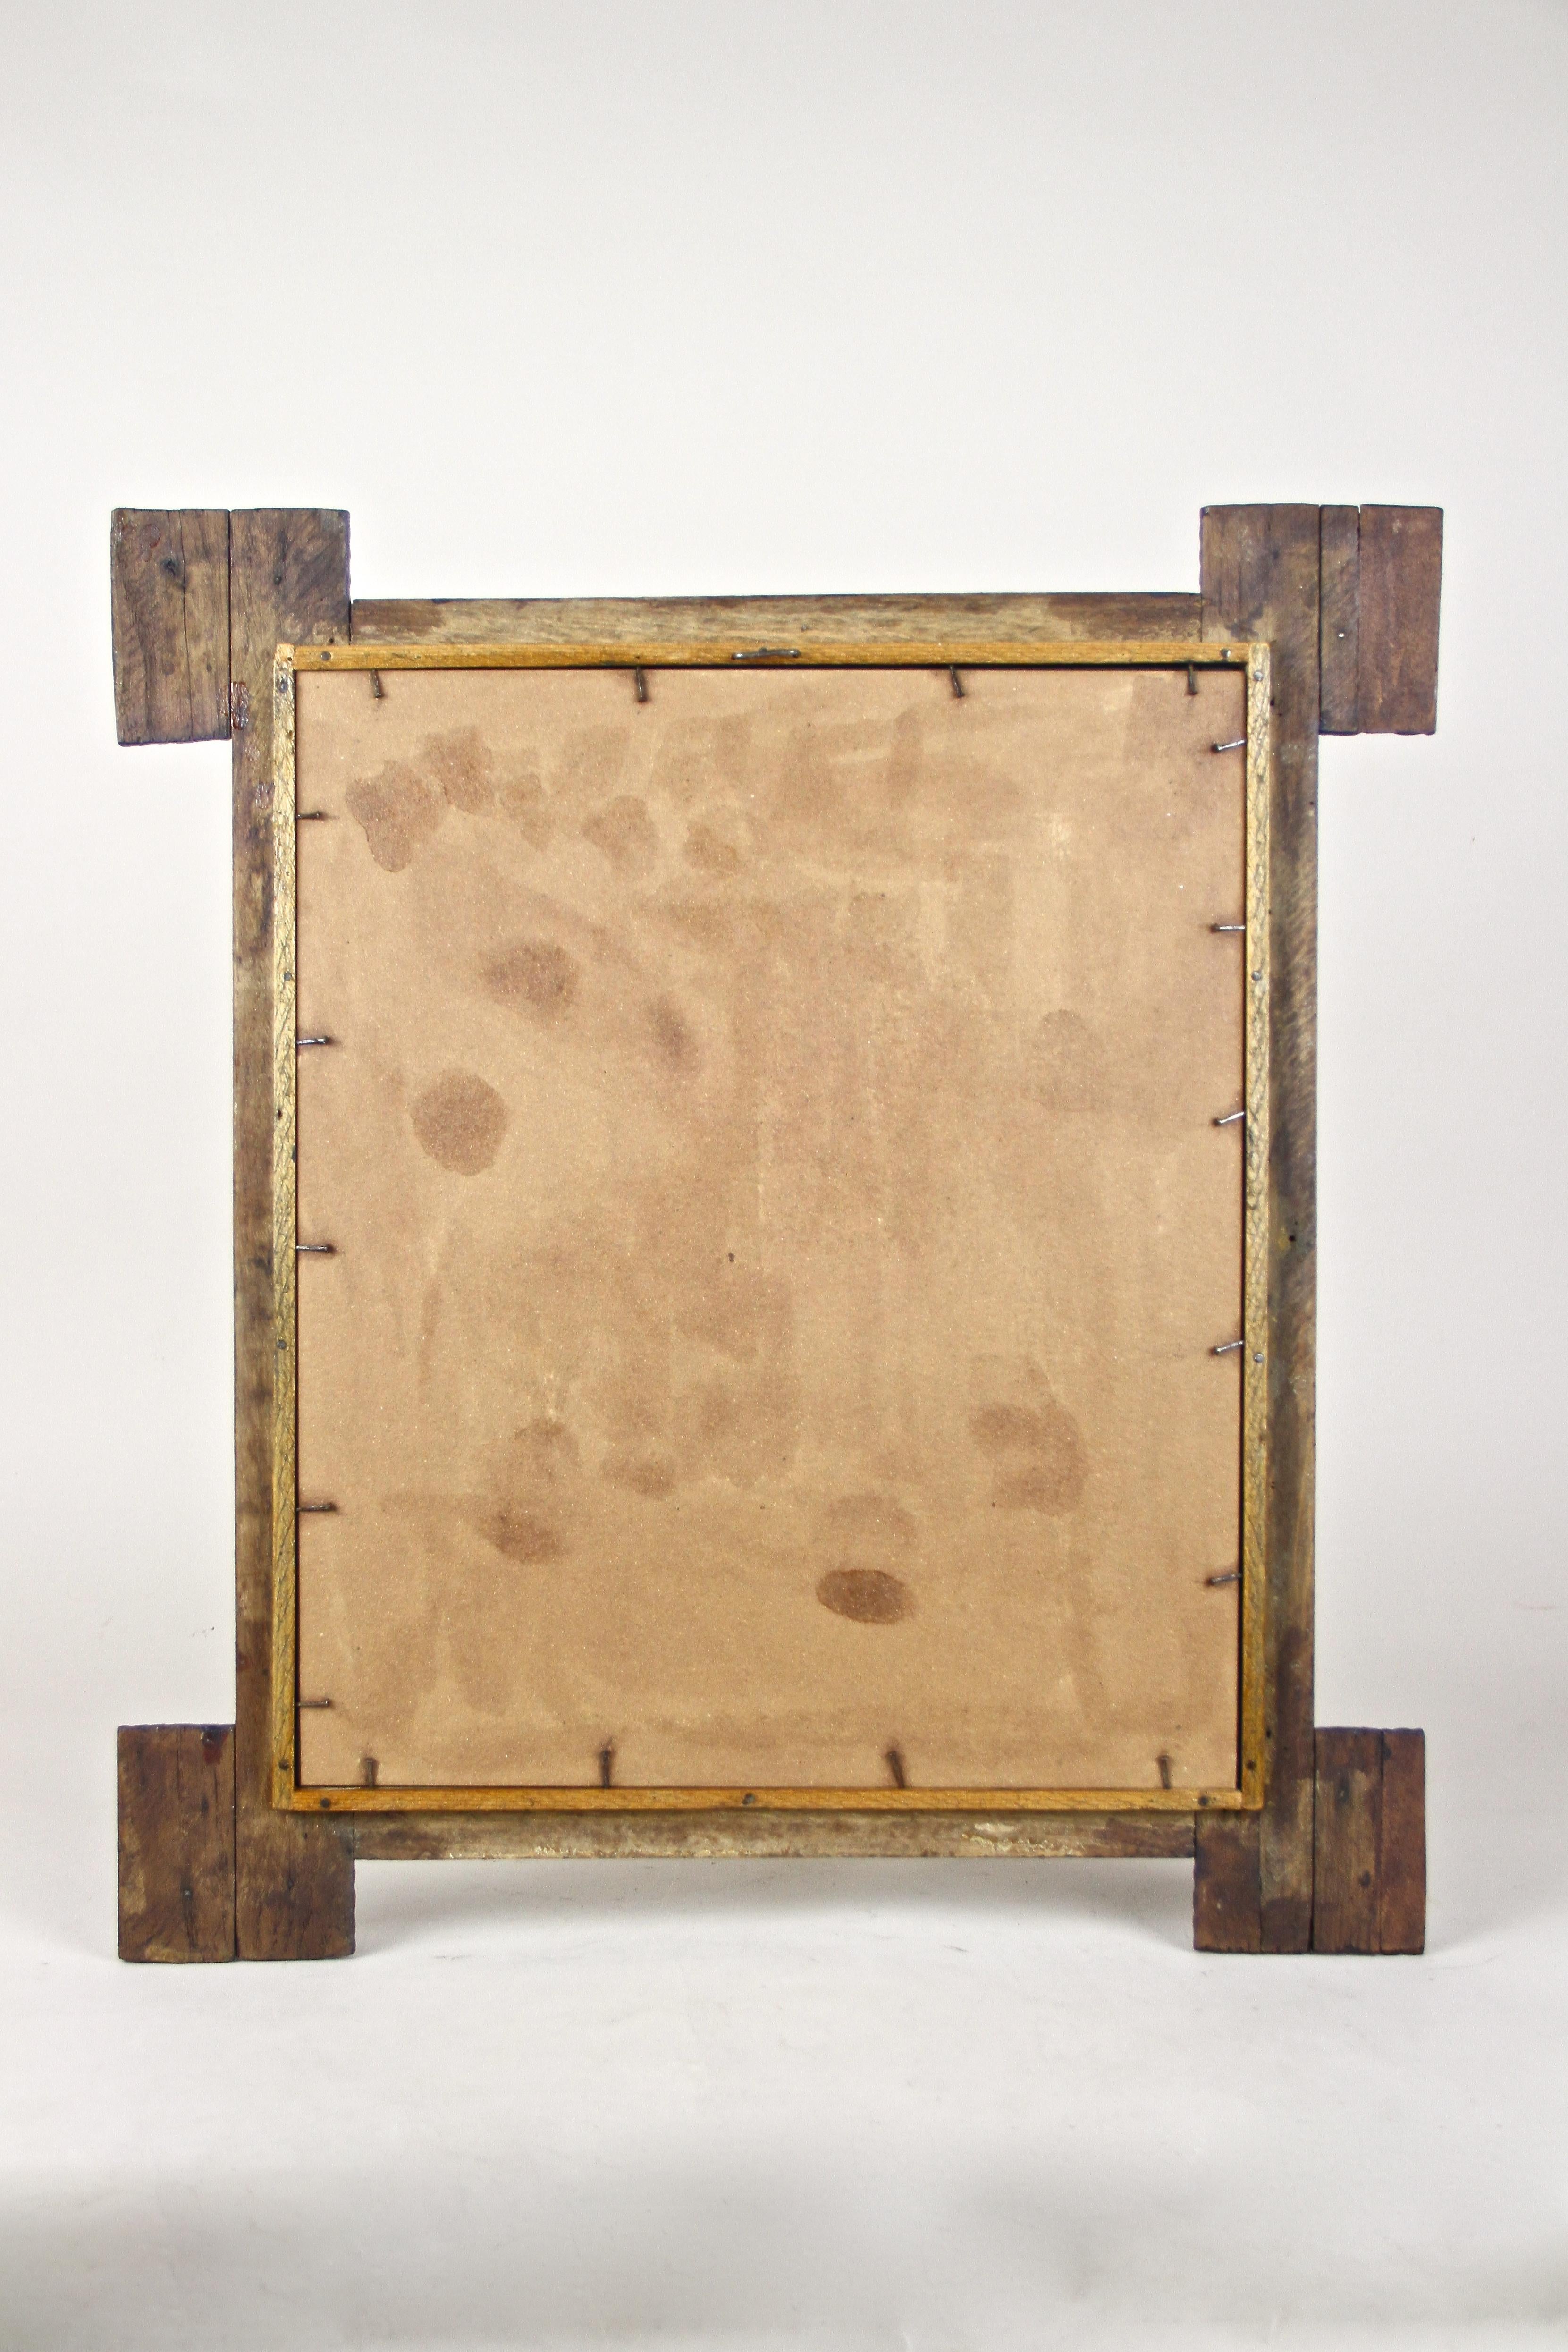 Rustic Tramp Art Wall Mirror with Extended Corners, Austria, circa 1870 For Sale 9